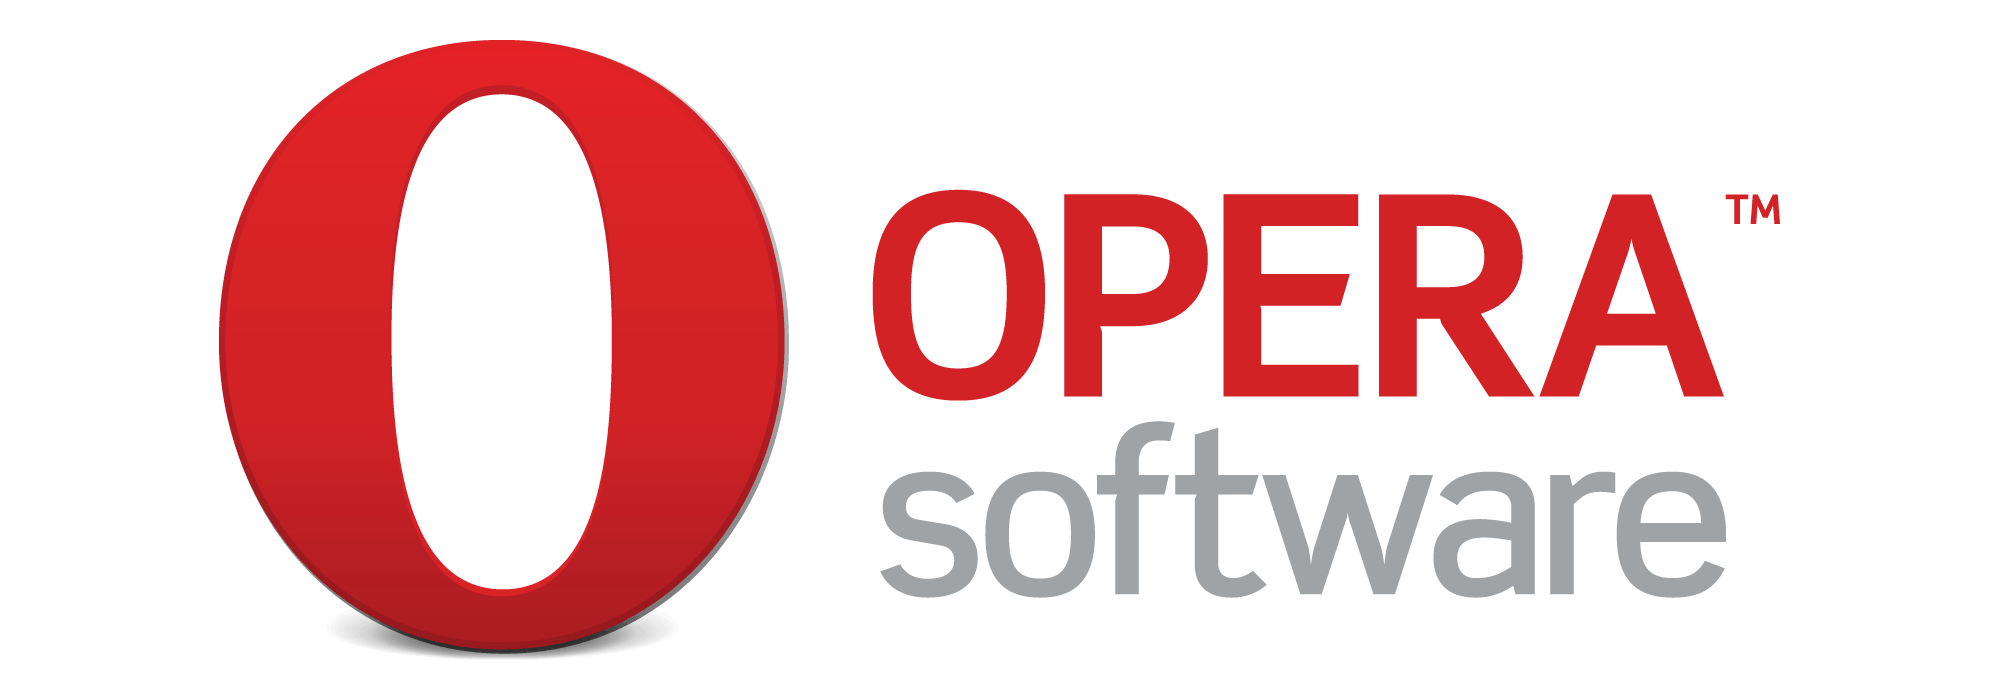 Old Opera Logo - India is now the biggest market for Opera Mini. The Tech Portal